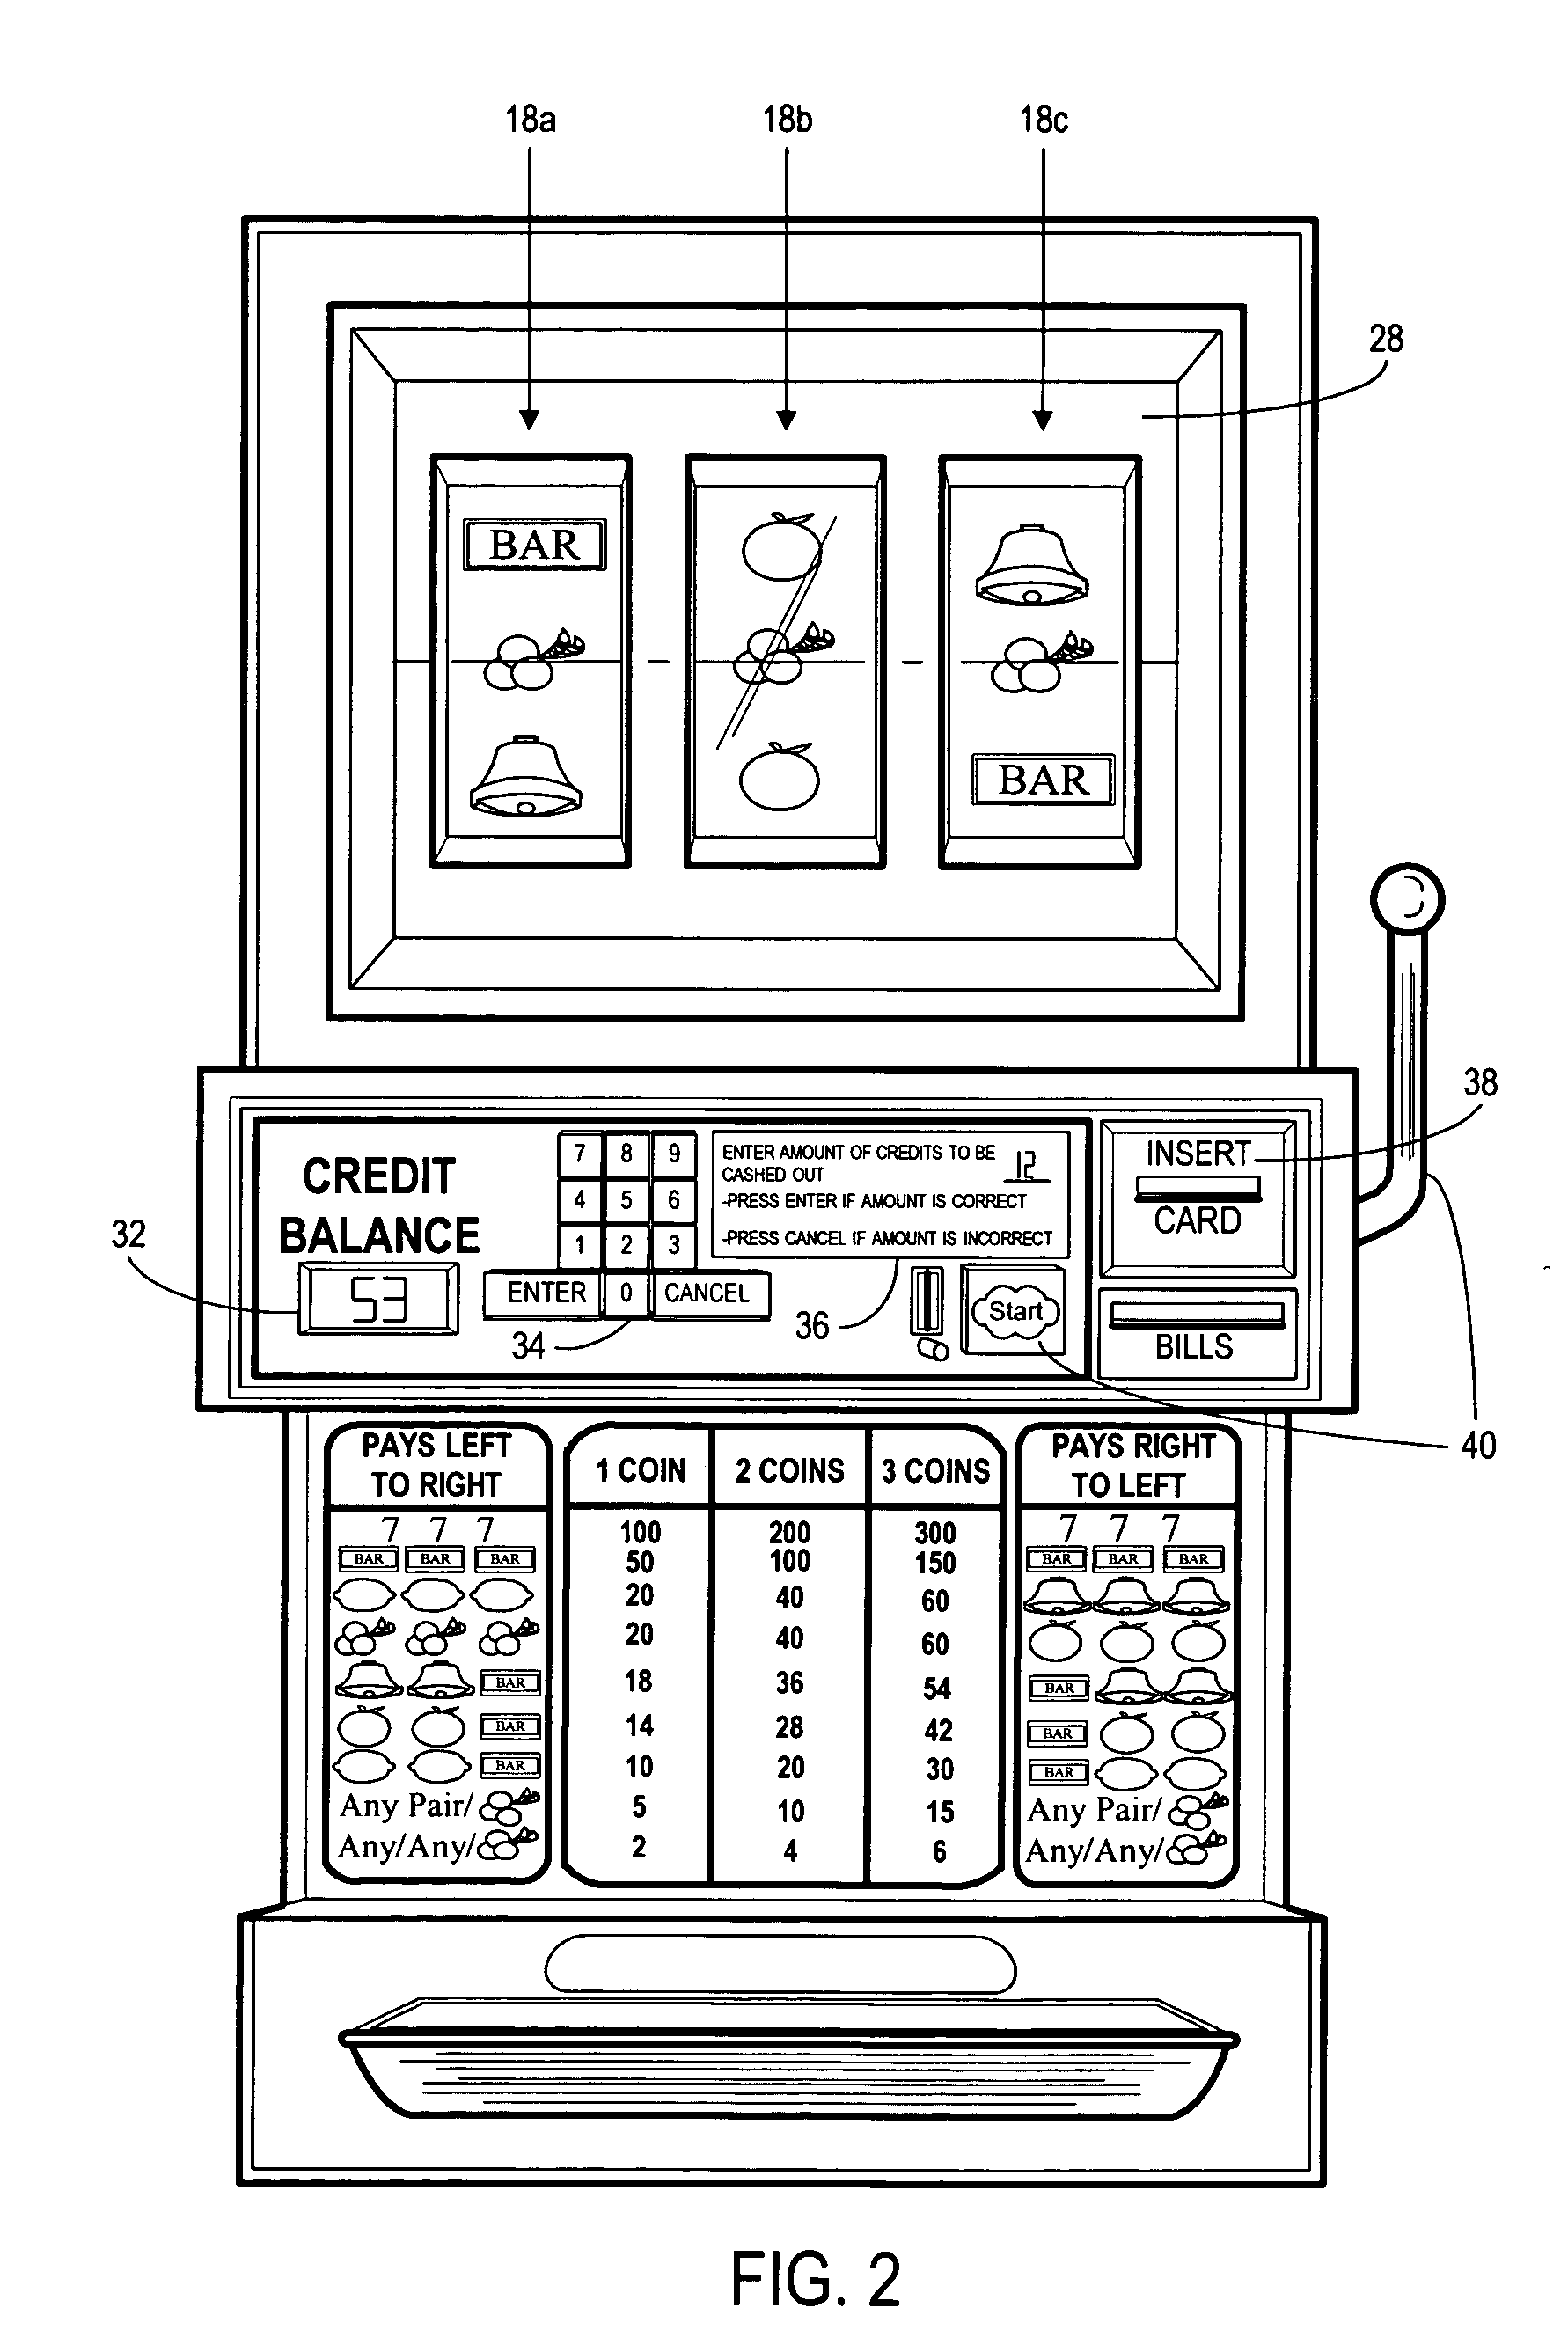 Method and apparatus for operating a gaming device to dispense a specified amount